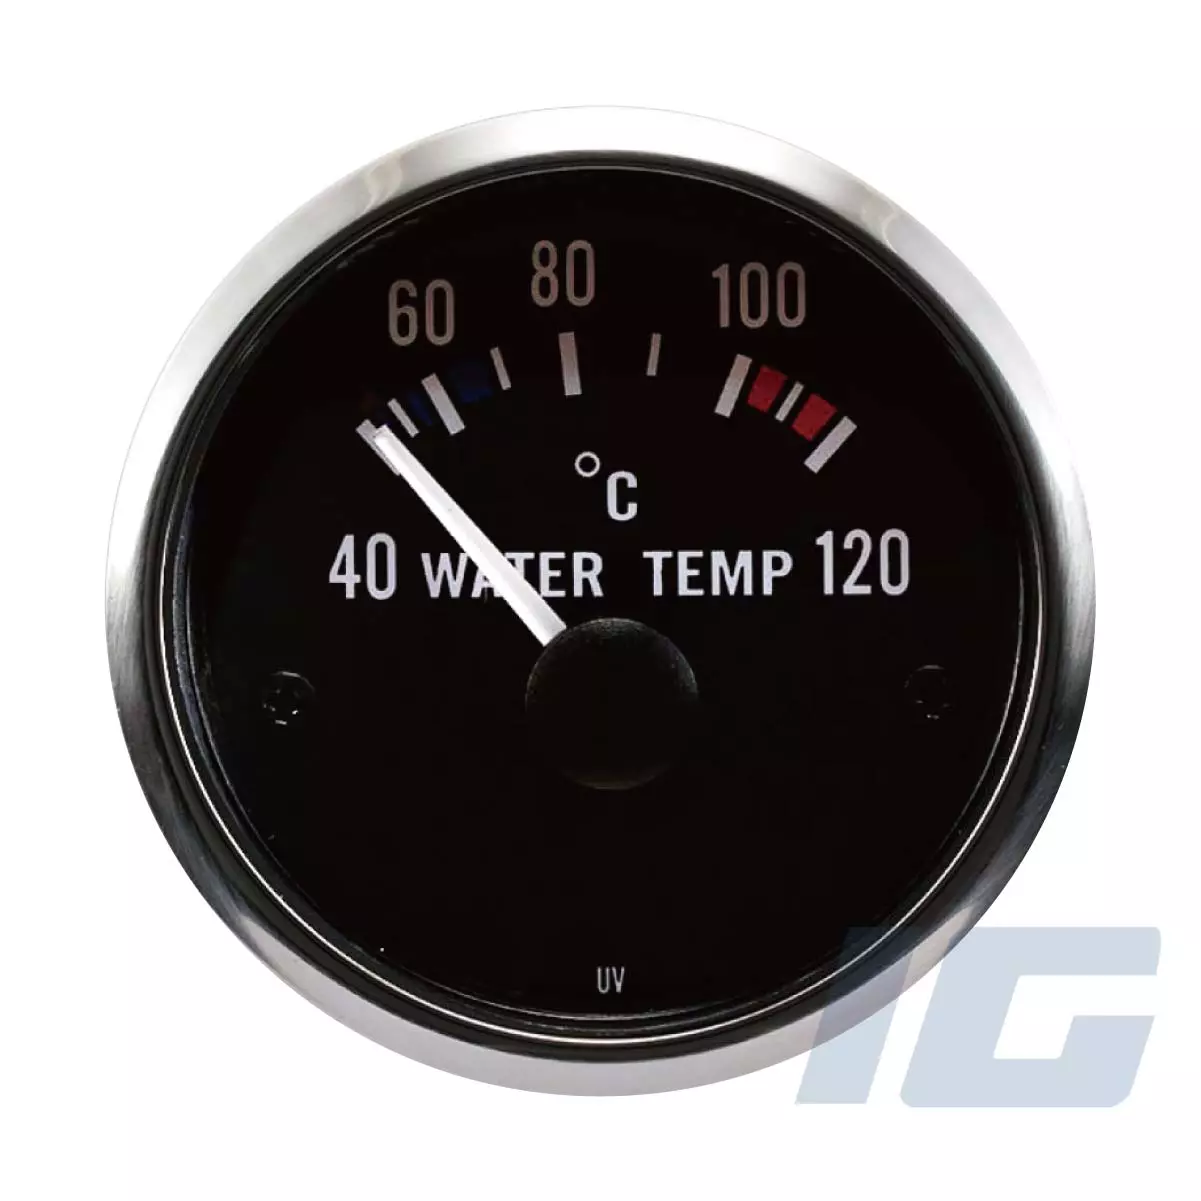 igauge, AFTERMARKET THERMOMETER COOLANT WATER TEMPERATURE GAUGE FOR CARS WITH TEMP PROBE SENSOR KIT